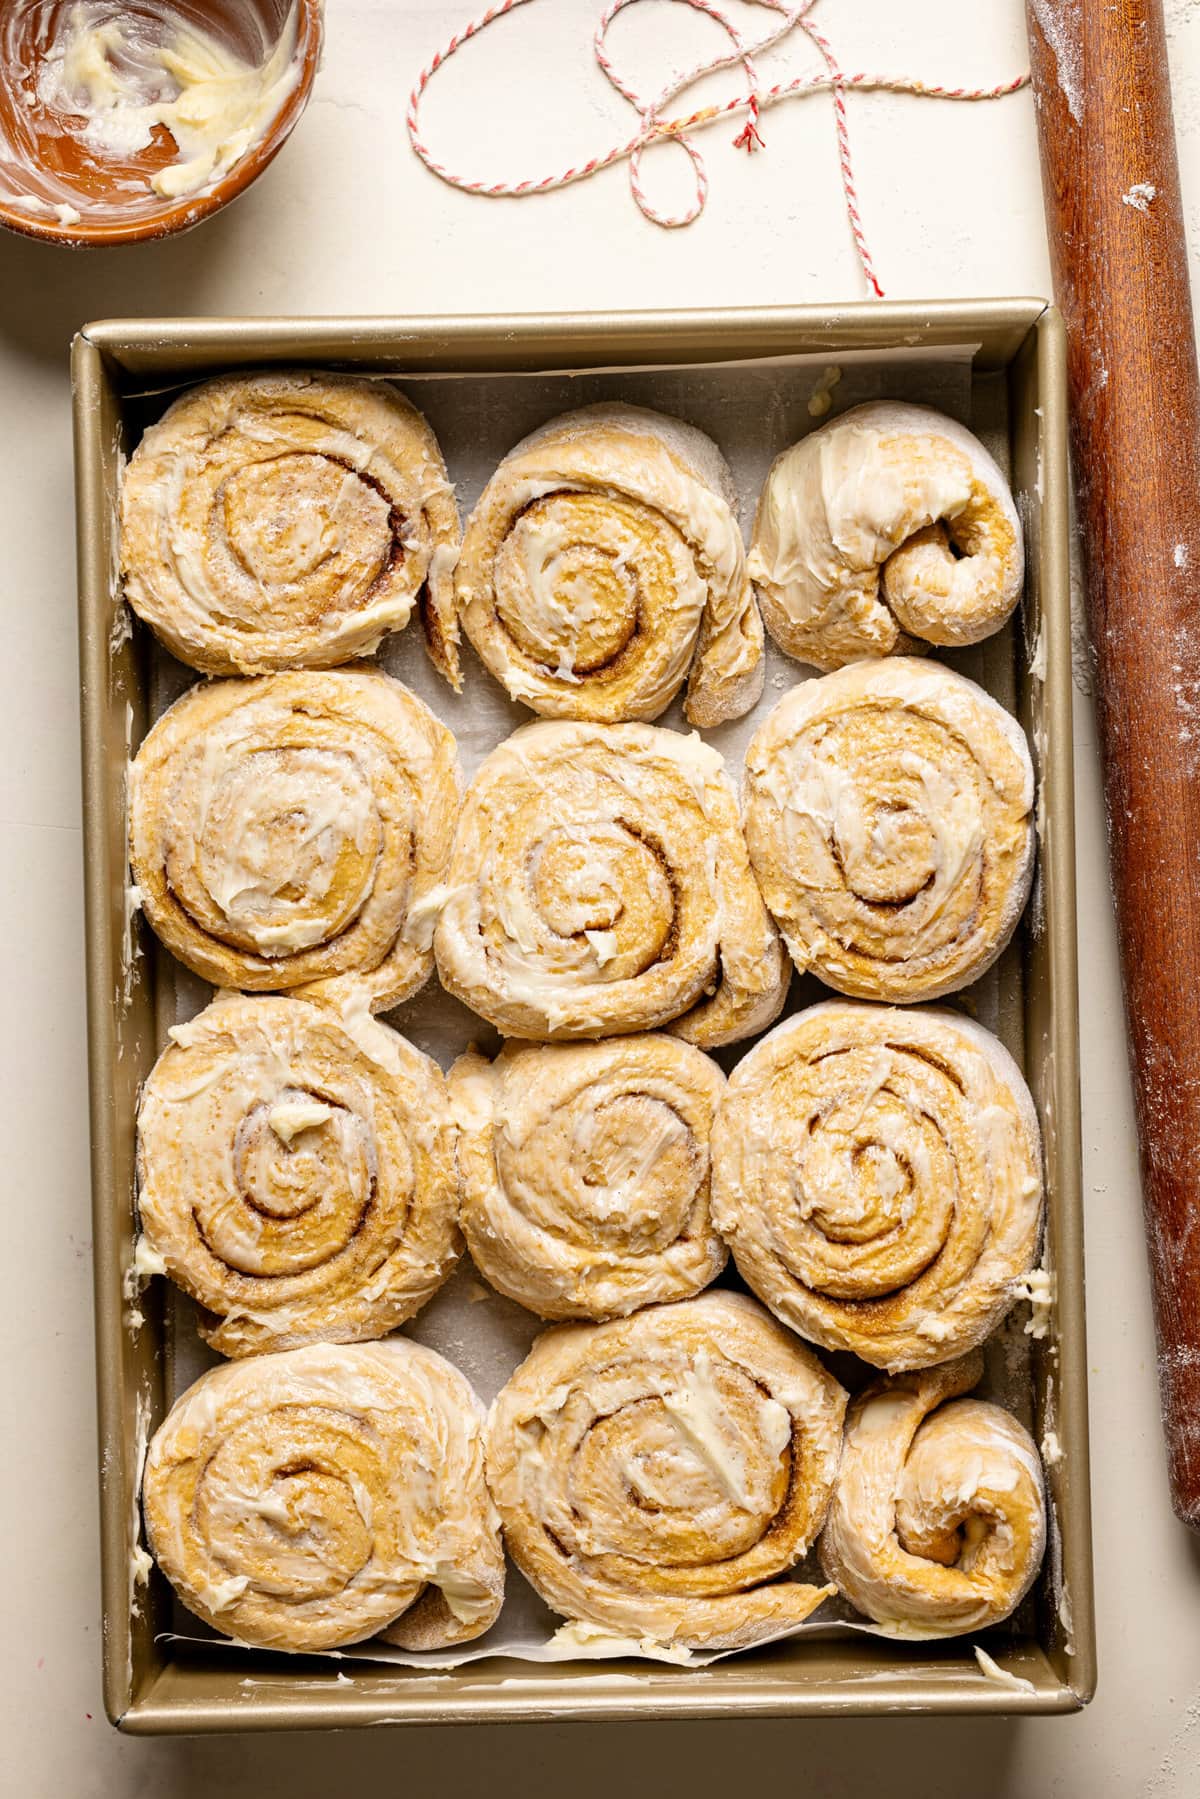 Cinnamon rolls in a baking dish and a rolling pin.